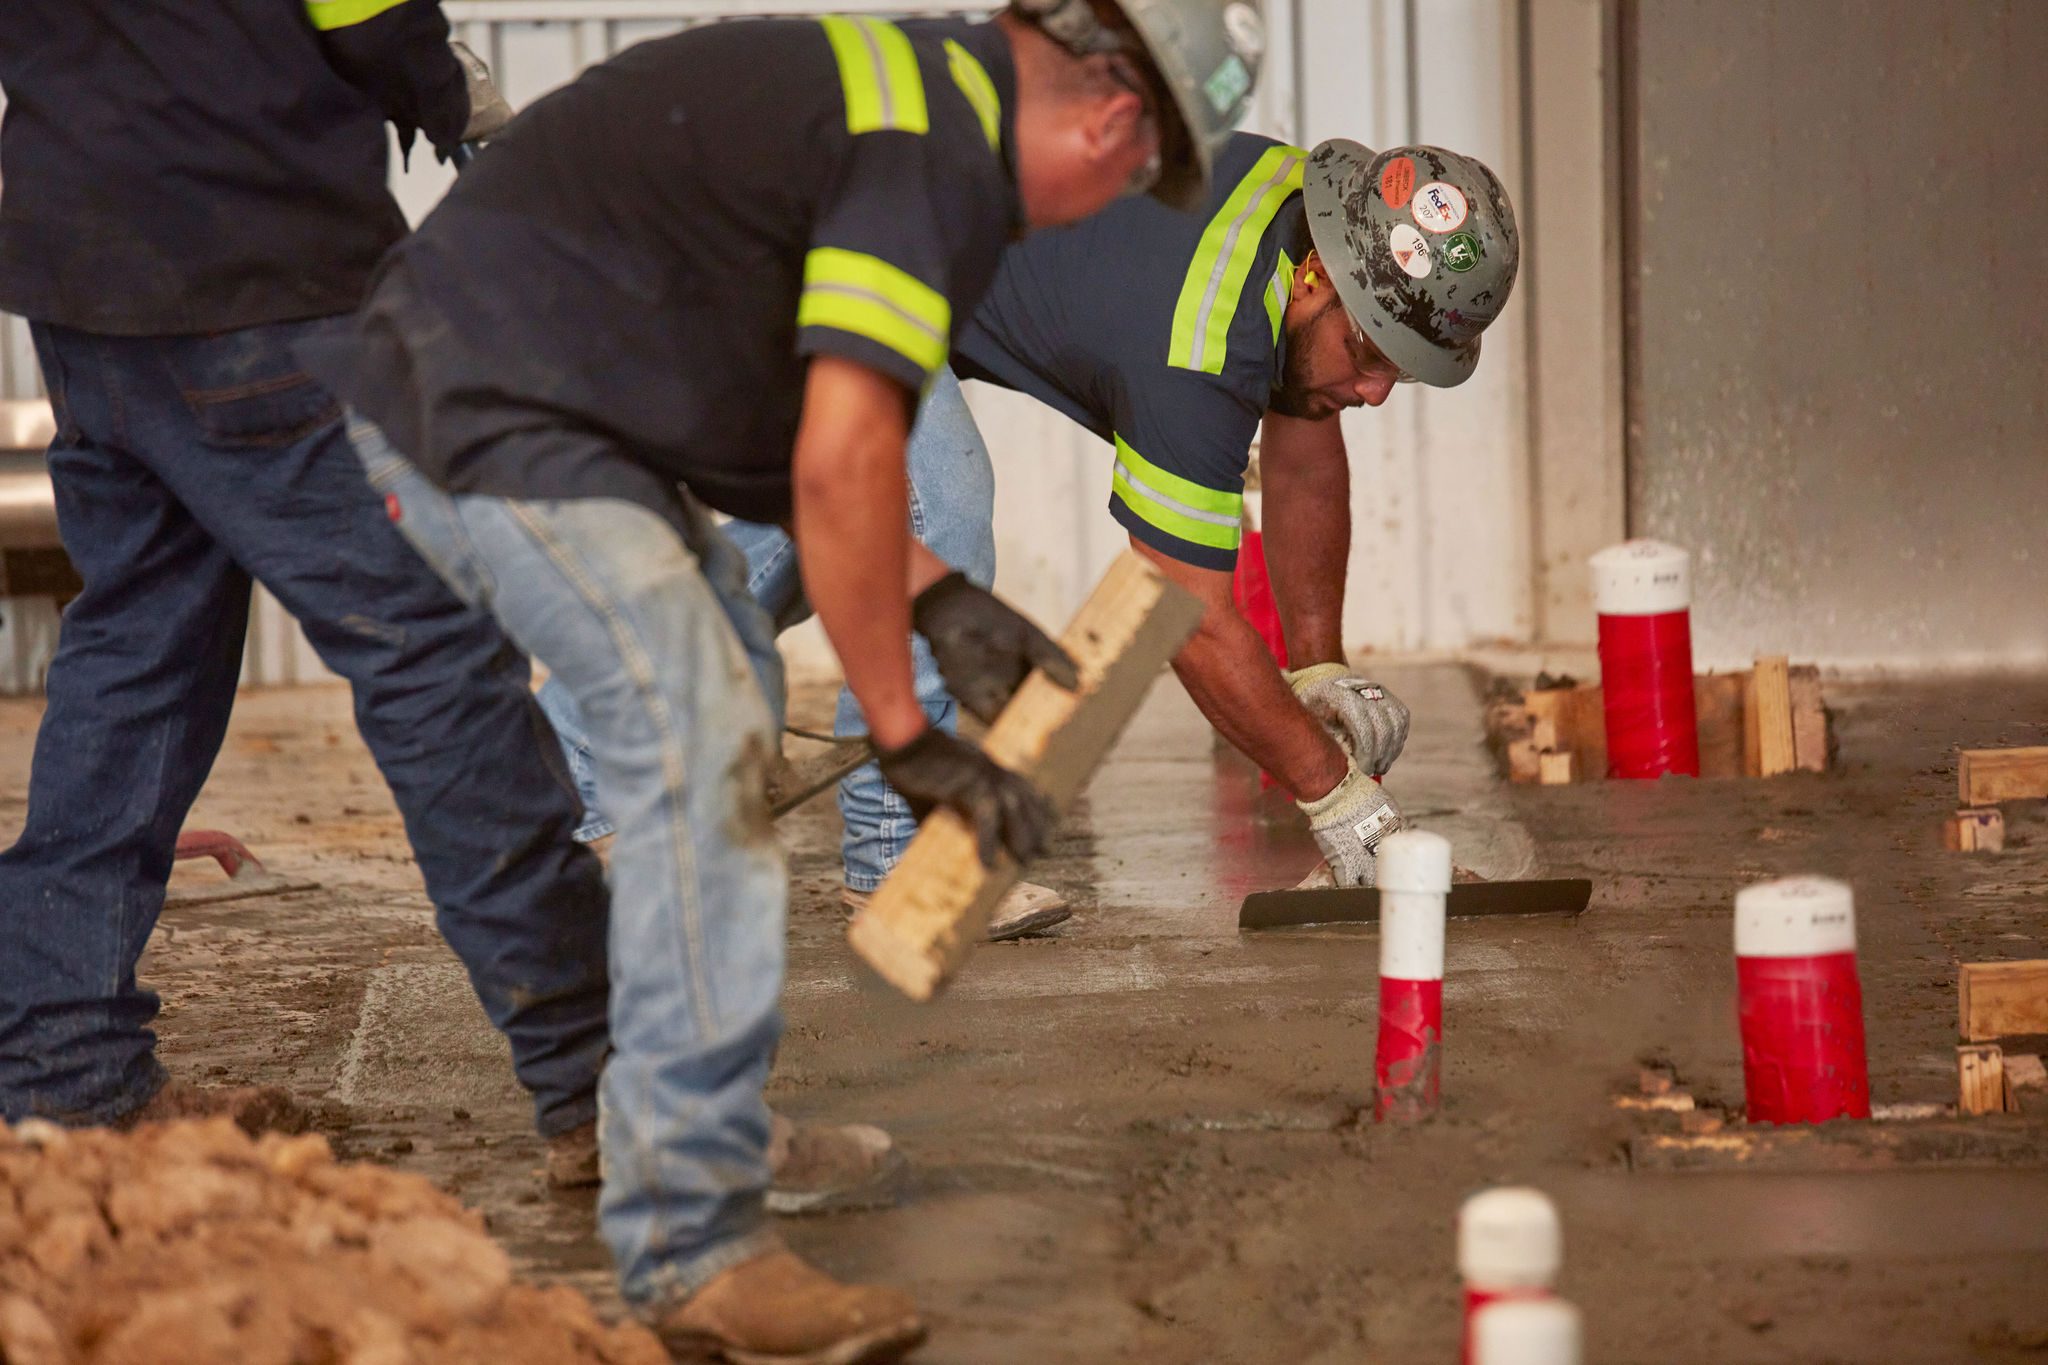 Pouring concrete is a work of art. It requires team work and dedication to ensure the concrete pour finishes smooth.